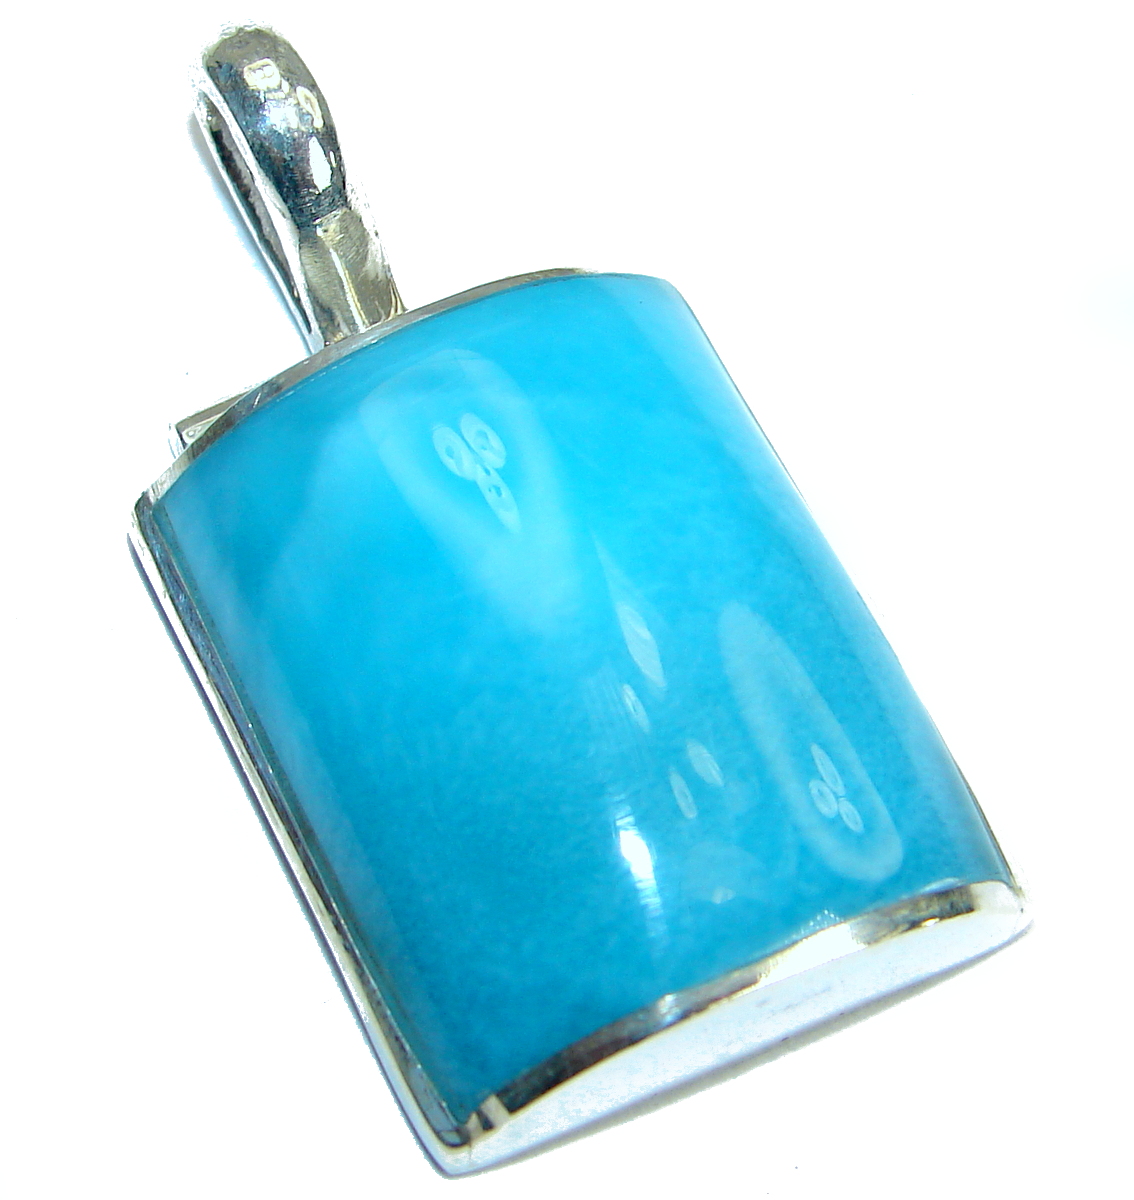 Handmade Artisan Sterling Silver 925 Pendant with unique one of a kind Larimar,  18.90 grams of marvelous handcrafted jewelry design. Only one piece availble ready to ship! It's unique worldwide pendant - simply piece of art in world of fine jewelry. Amazing Quality Larimar  .925 Sterling Silver handmade pendant  PENDANT DETAILS: Weight: 18.90g; Material: Sterling Silver; Main stone: Larimar; Other stones: ; Dimension: L - 1 5/8, W - 5/8, T - 3/8 inch; Inner Bail Diameter: 1/4 inch; Stamp / Mark: 925; Condition: New; Main color: blue; Shape: rectangle; Collection: Bali;  Item Code: 8-maj-18-19